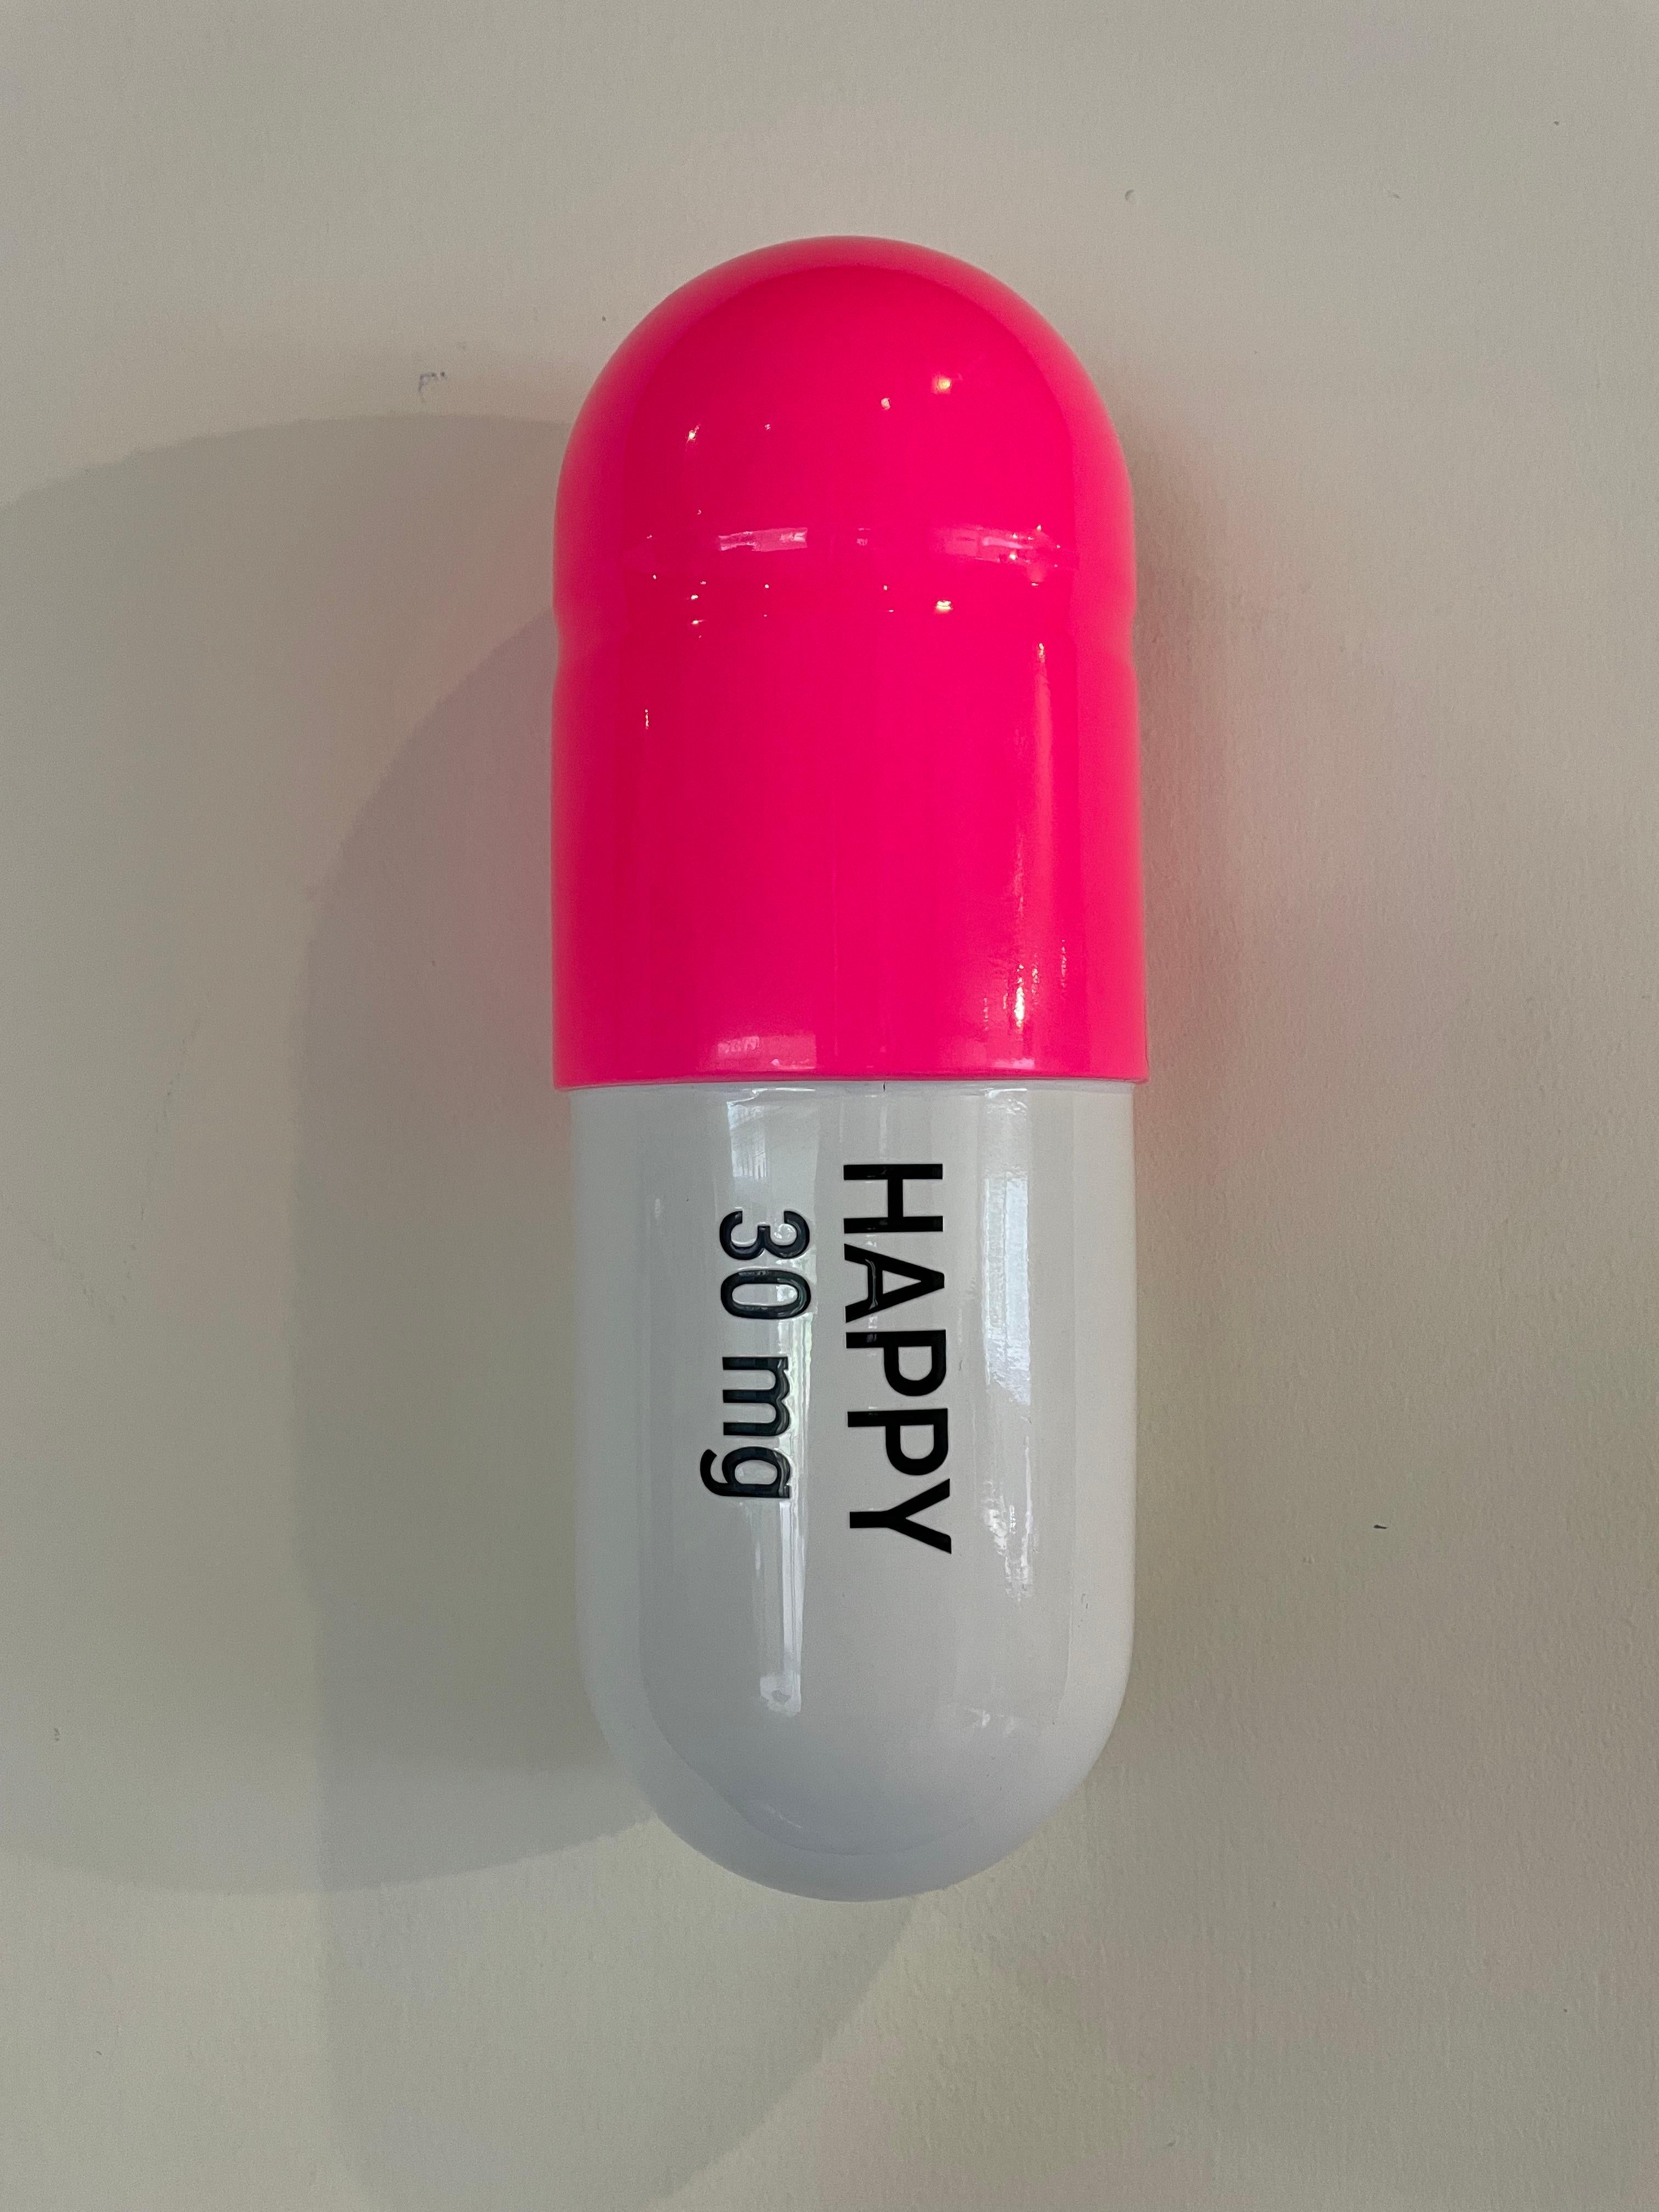 30 mg Large Happy pill (Pink and white) - figurative sculpture - Sculpture by Tal Nehoray